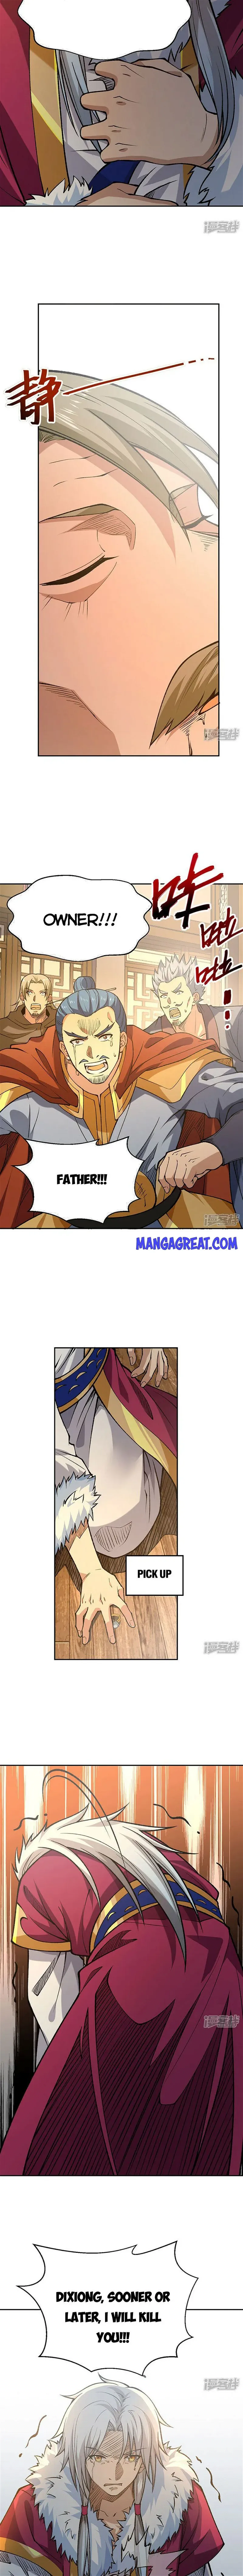 Martial Arts Reigns Chapter 531 page 3